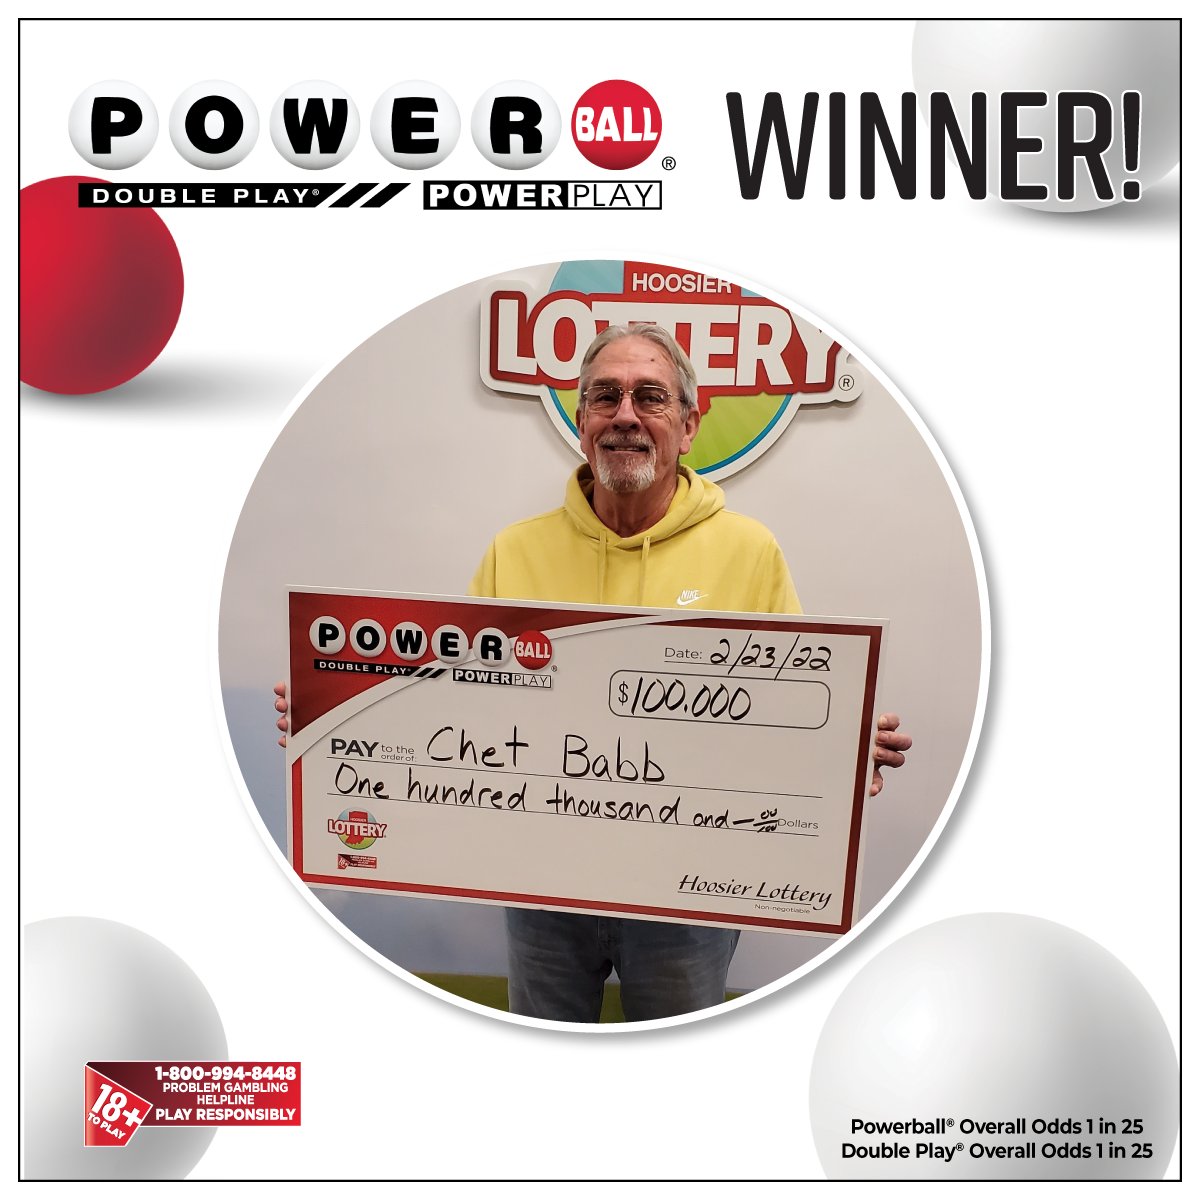 Chet won $100,000 from his Powerball ticket! He and a group of friends meet for breakfast in Pendleton daily and check the lottery numbers together. No one expected him to win! 

Read his story here: 
https://t.co/0JRbUJ7ufJ https://t.co/hfmOUMOERi